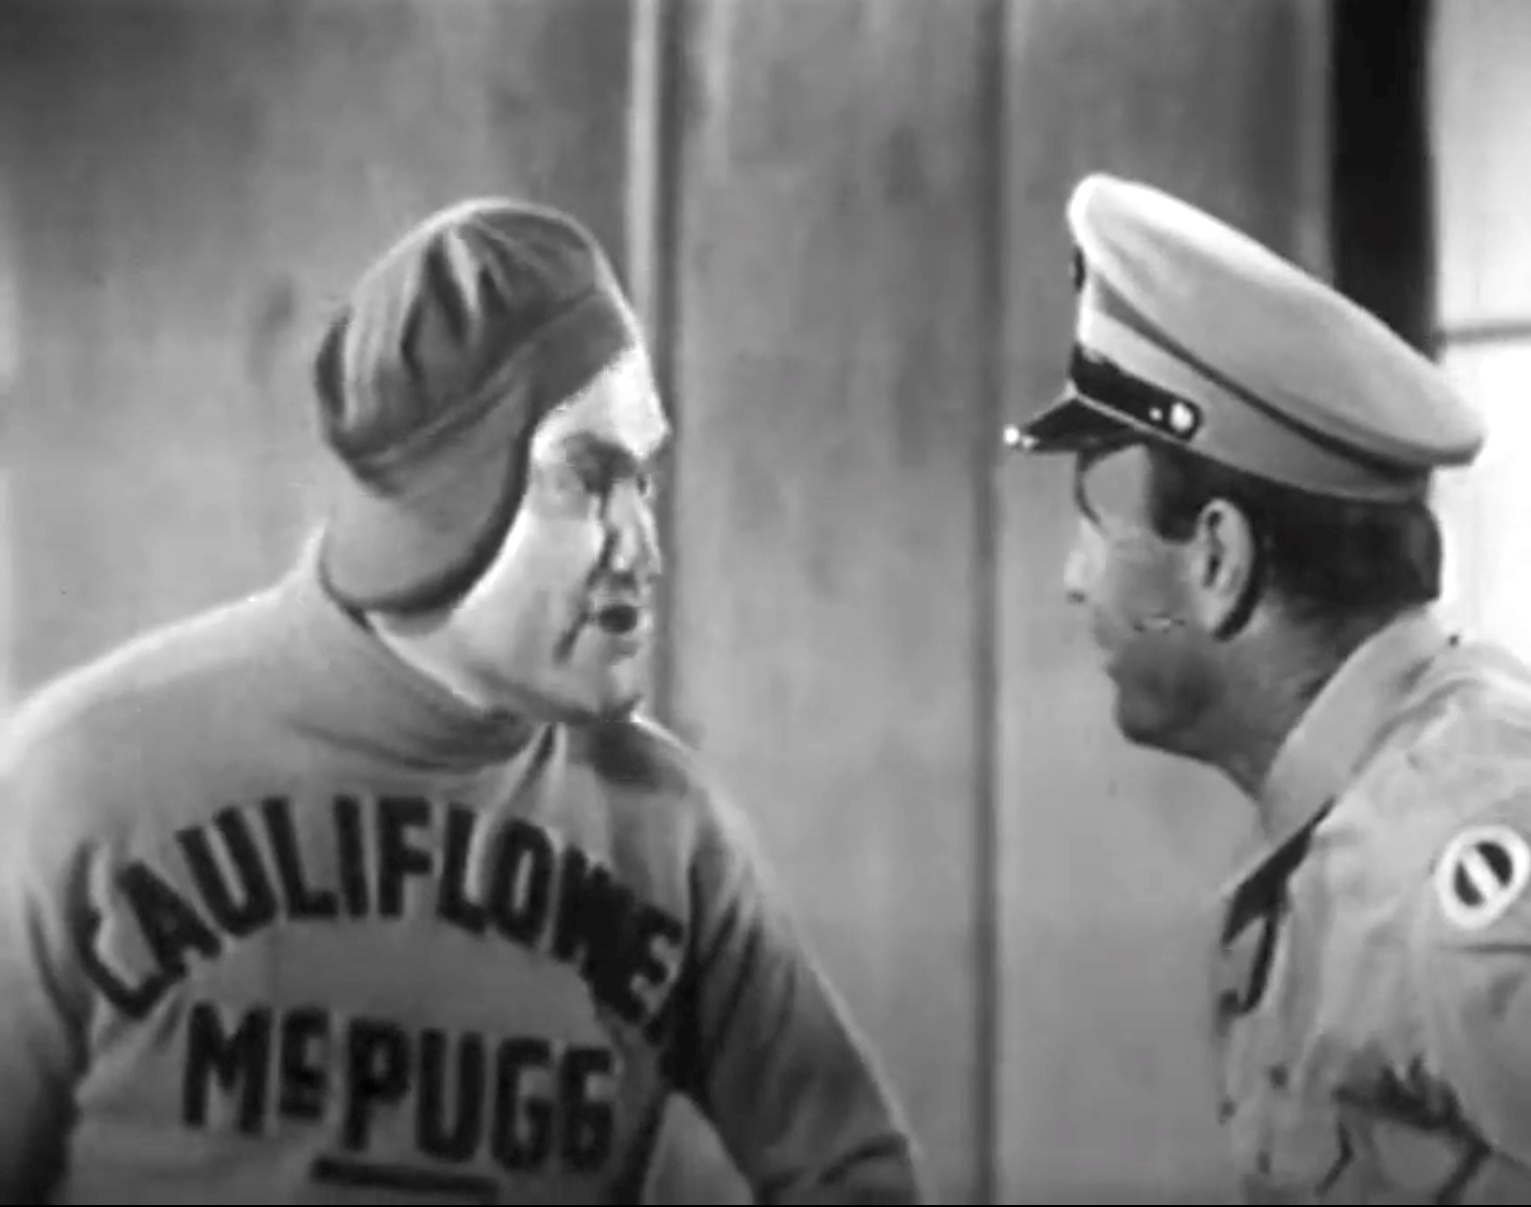 Cauliflower McPugg (Red Skelton) with his Army sergeant (Gil Perkins) in "G. I. McPugg"